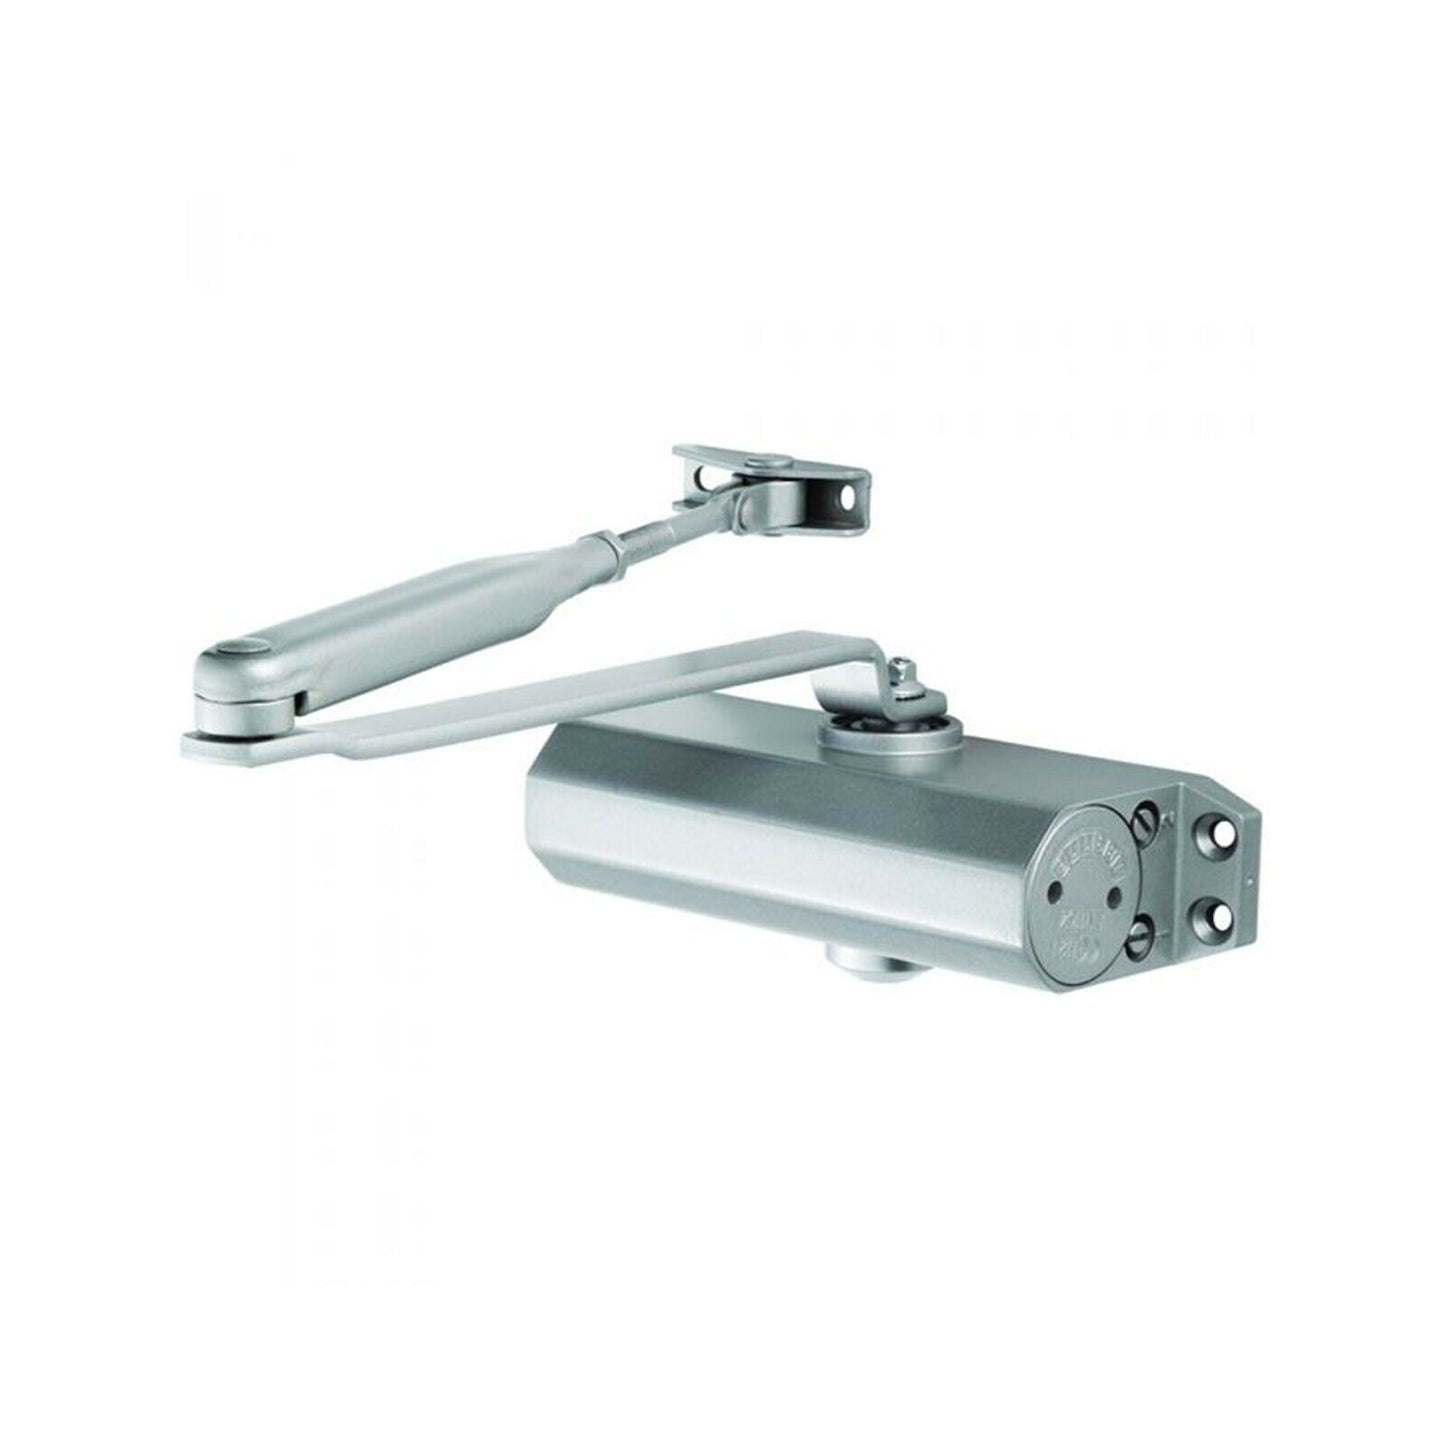 Plated Full Cover Overhead Door Closer